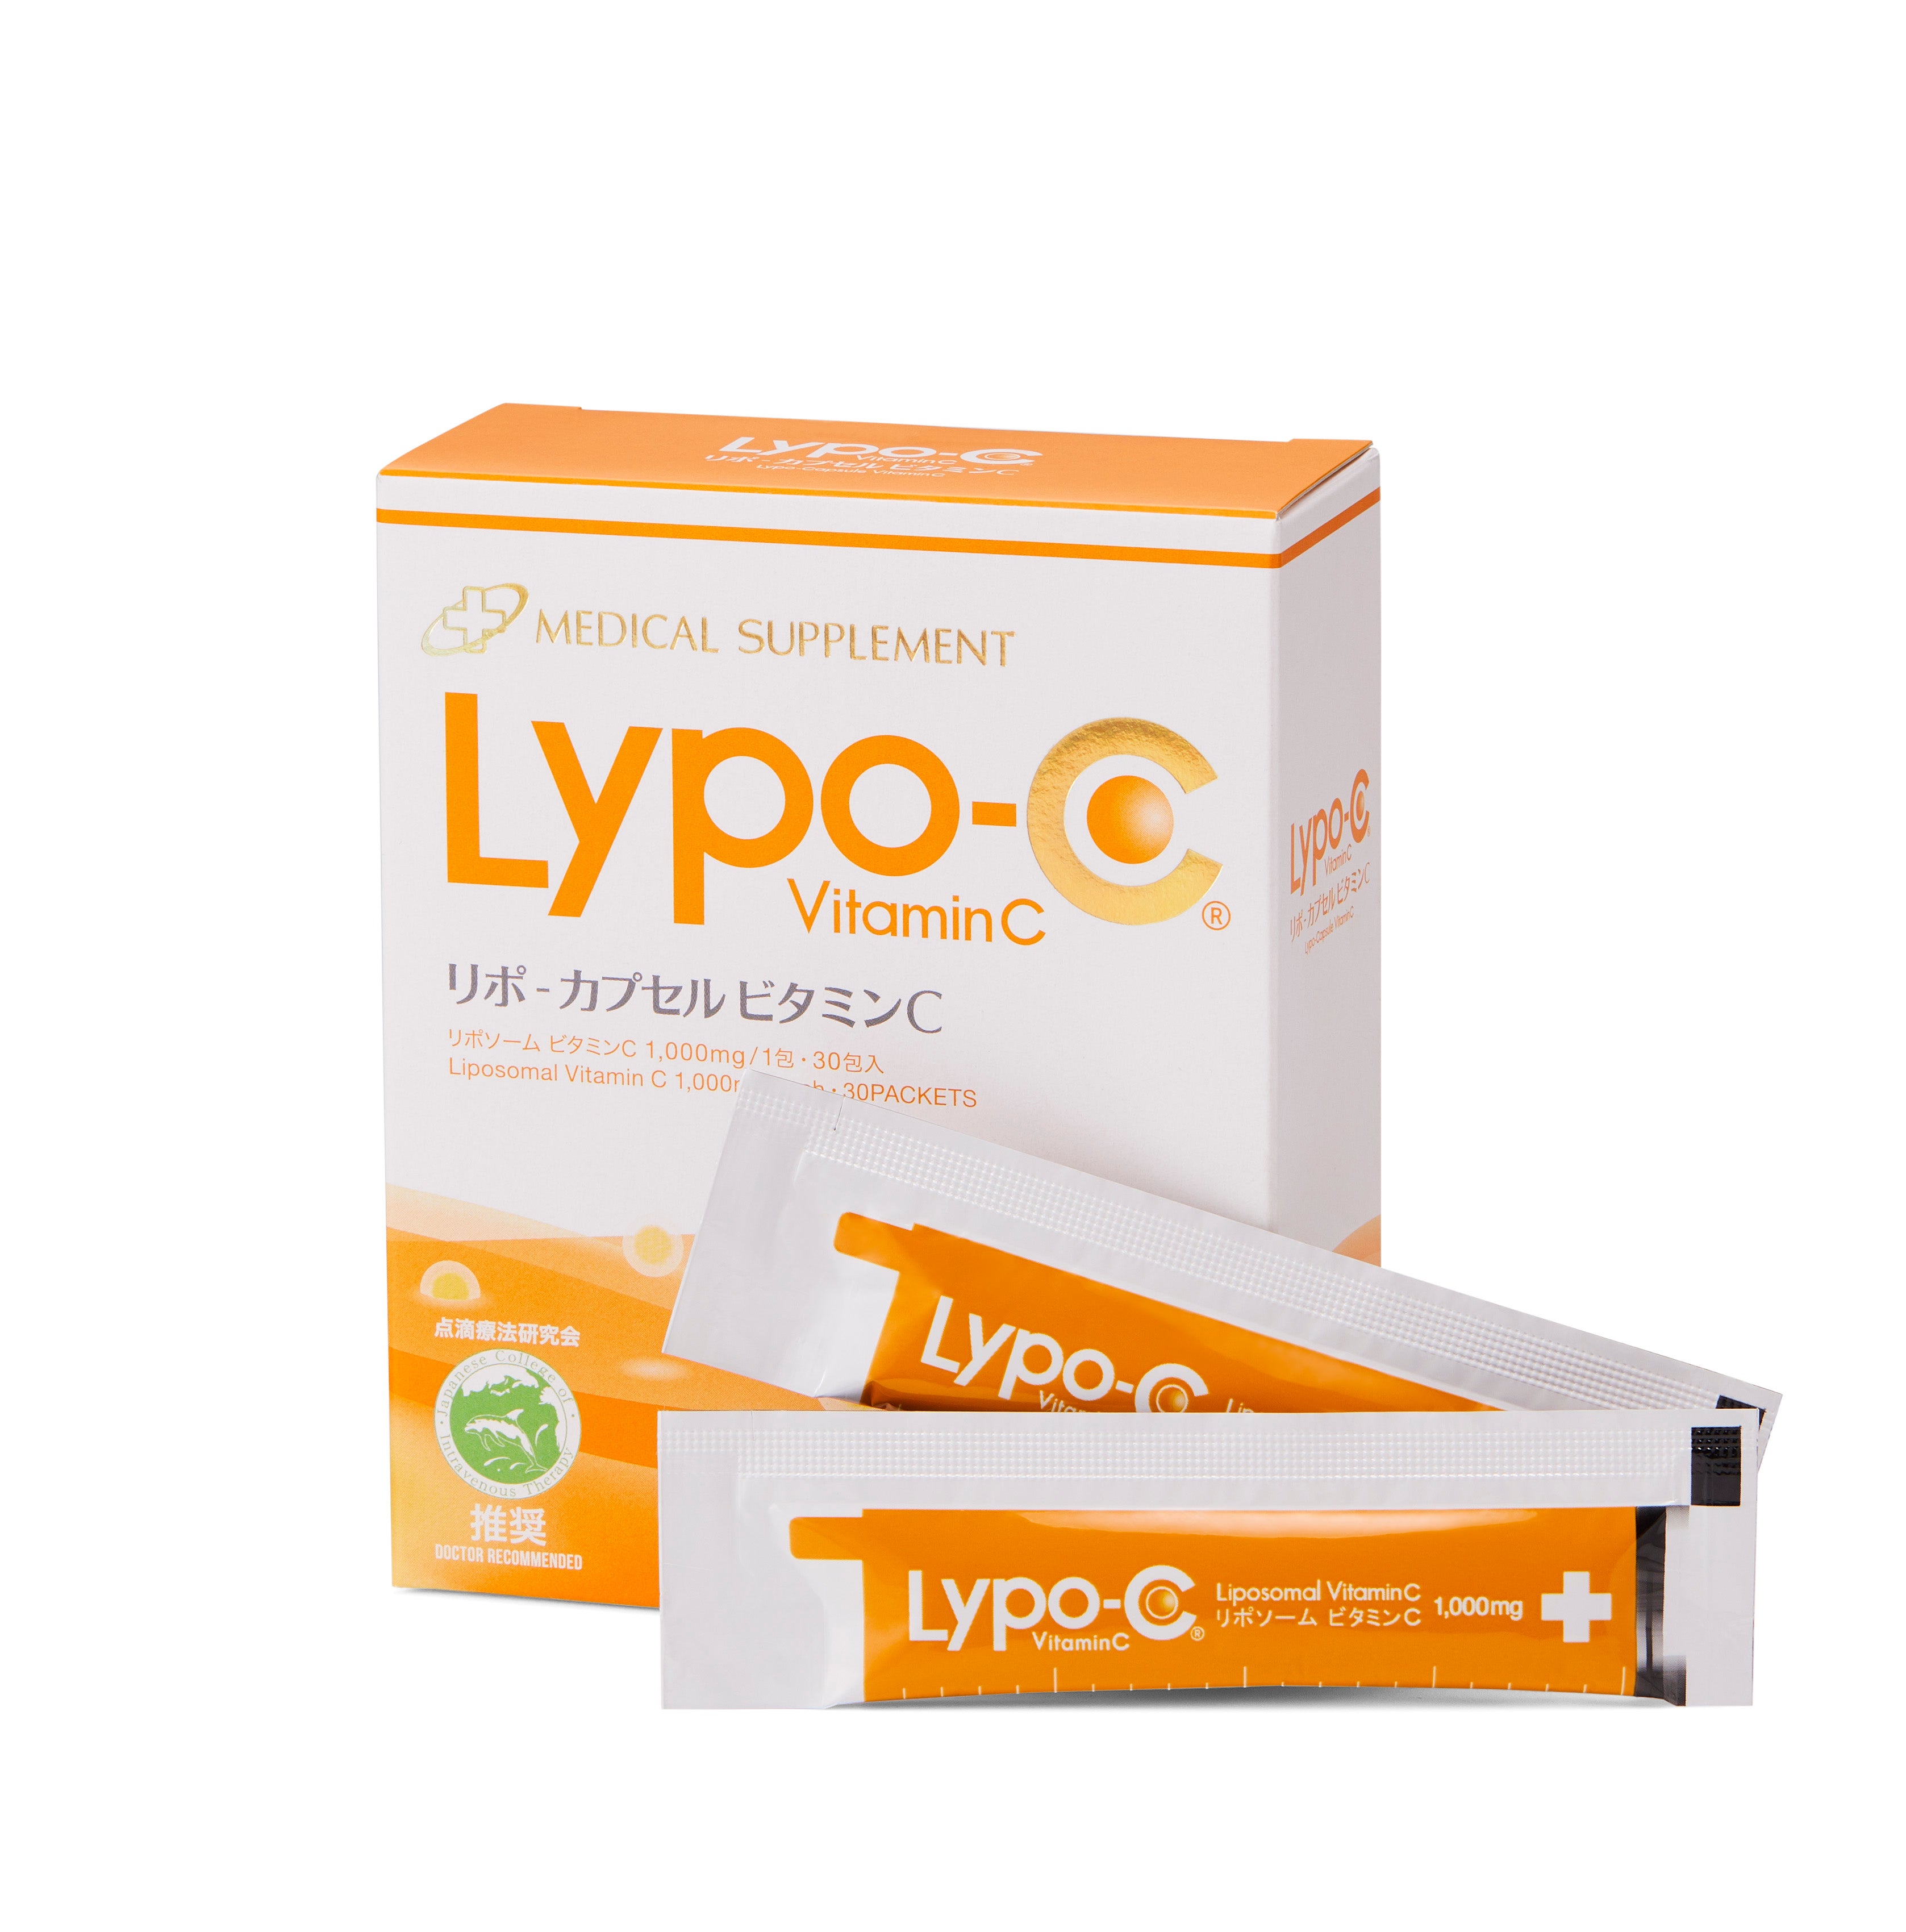 LYPO-C HIGH CONCENTRATION VITAMIN C ／ 高濃度ビタミンC (30 Packets / 30包入)